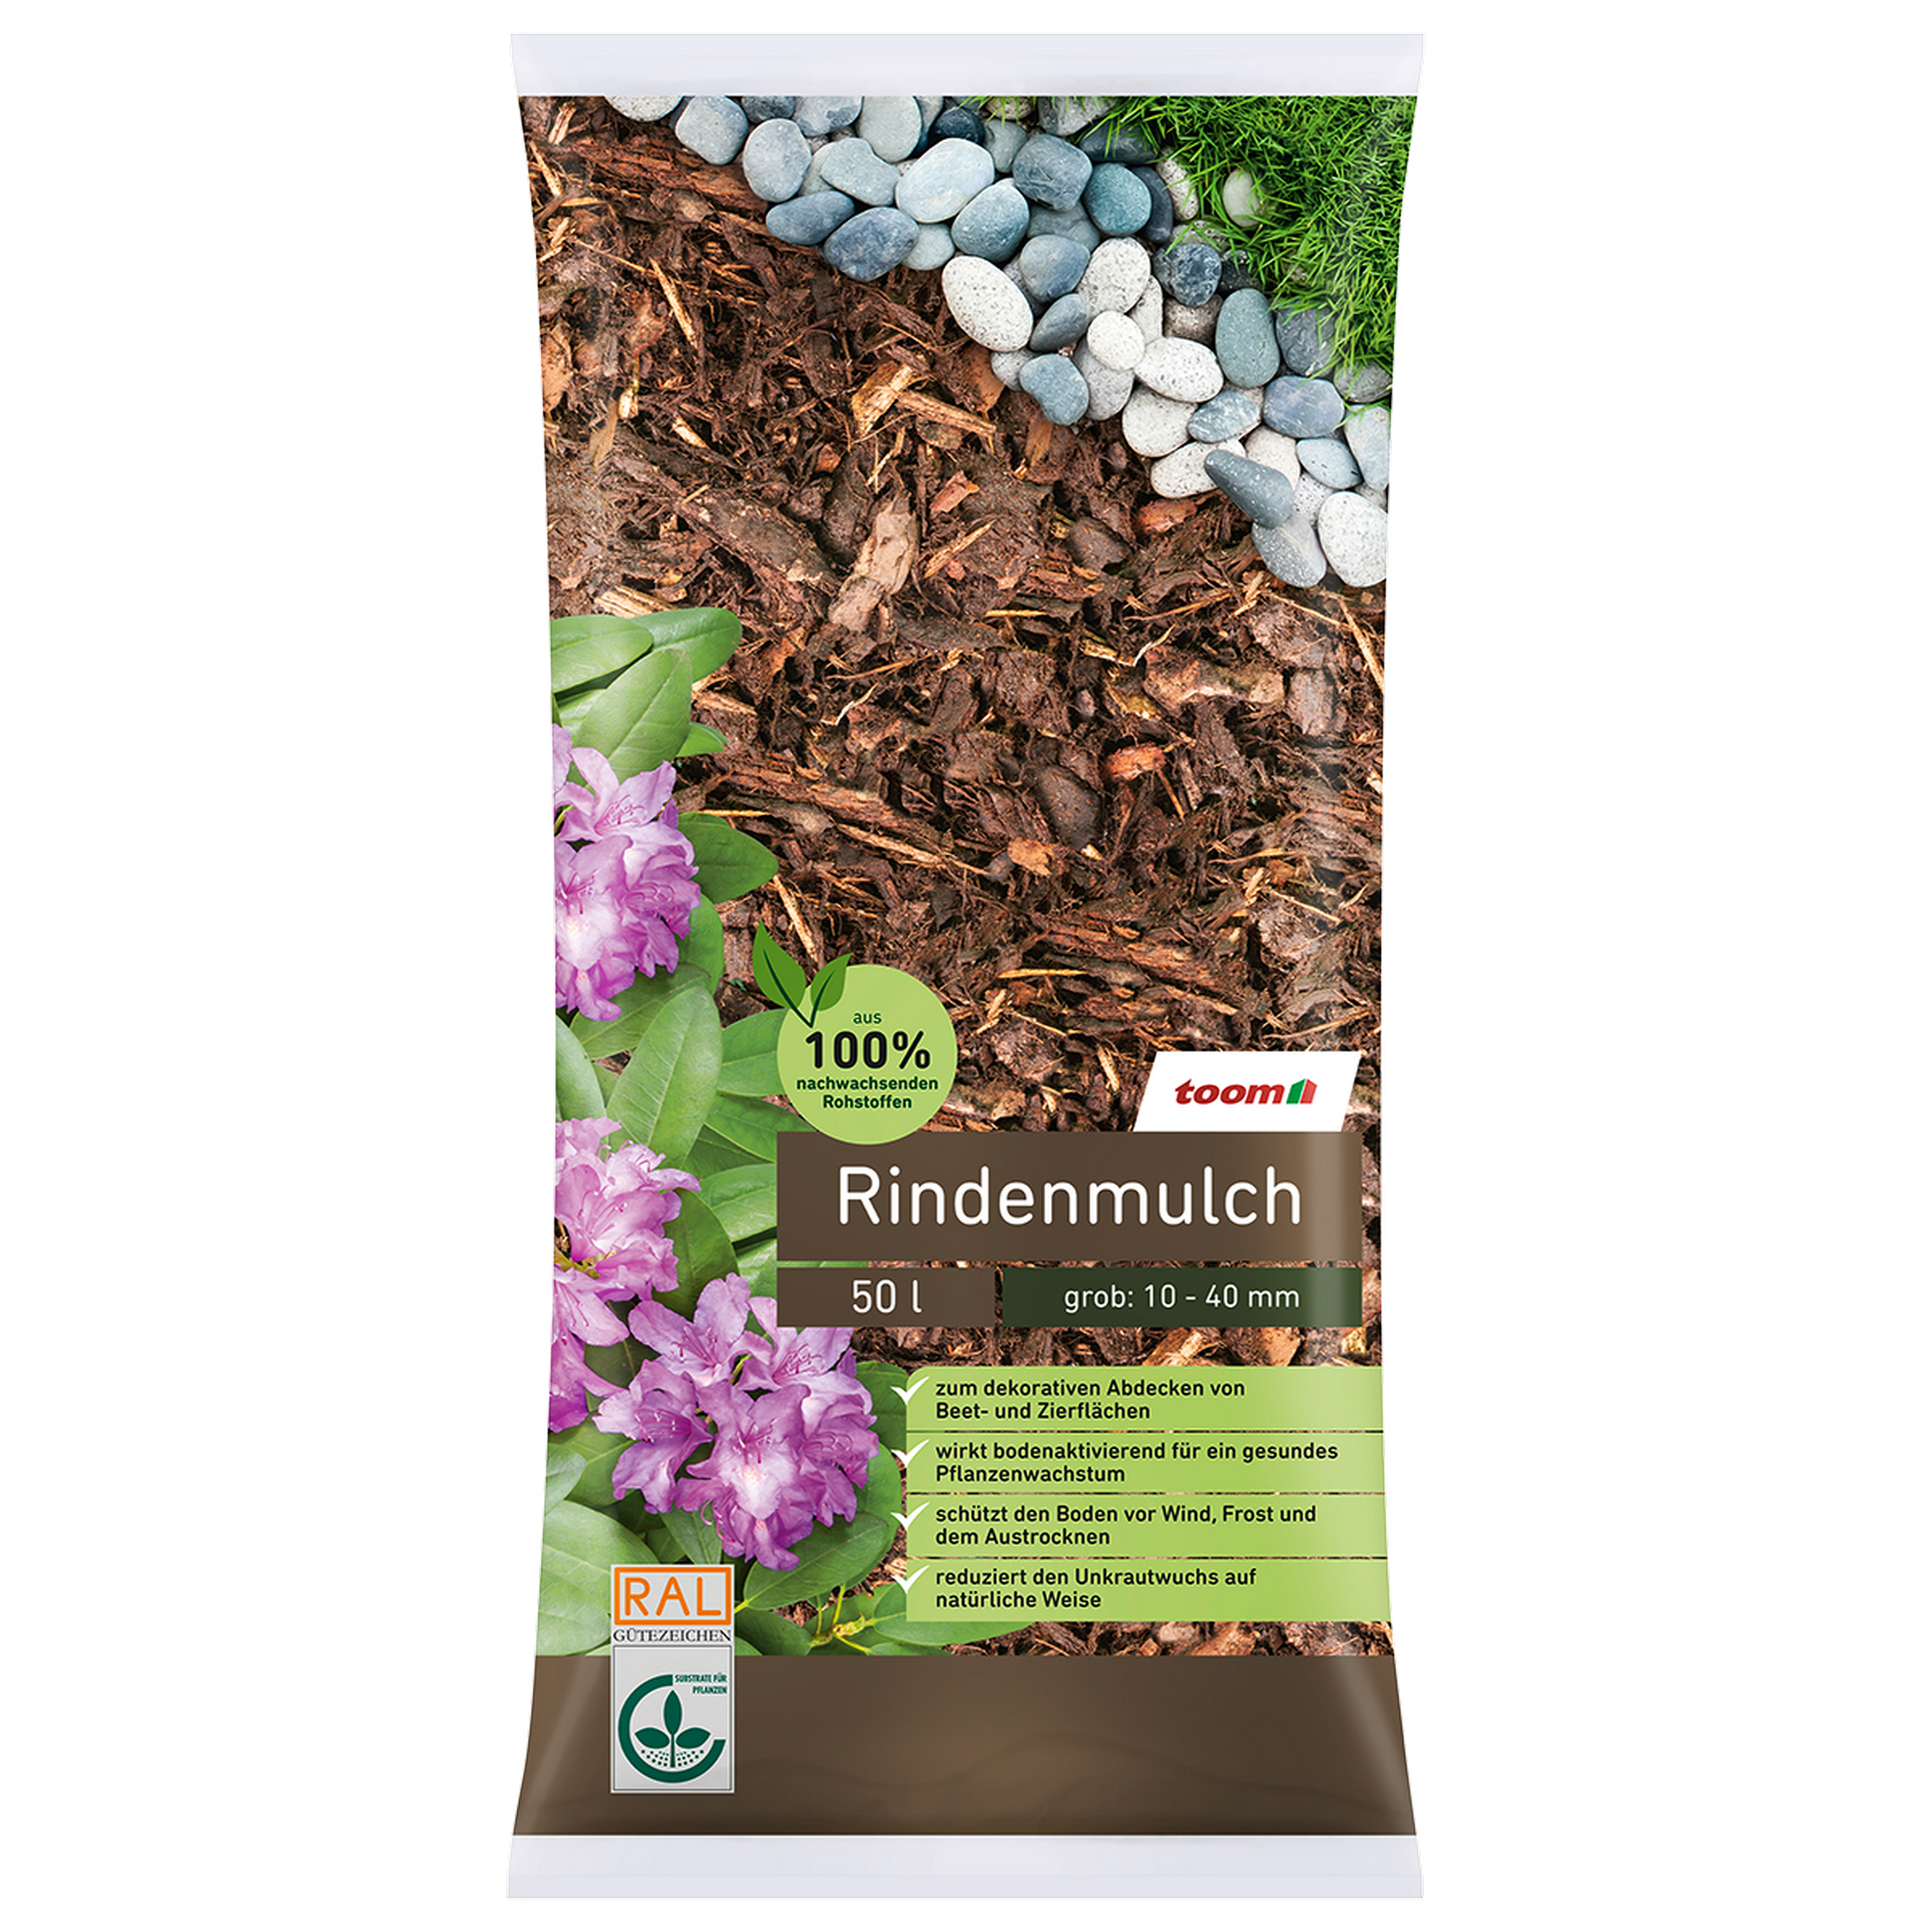 Rindenmulch 10-40 mm 50 l + product picture